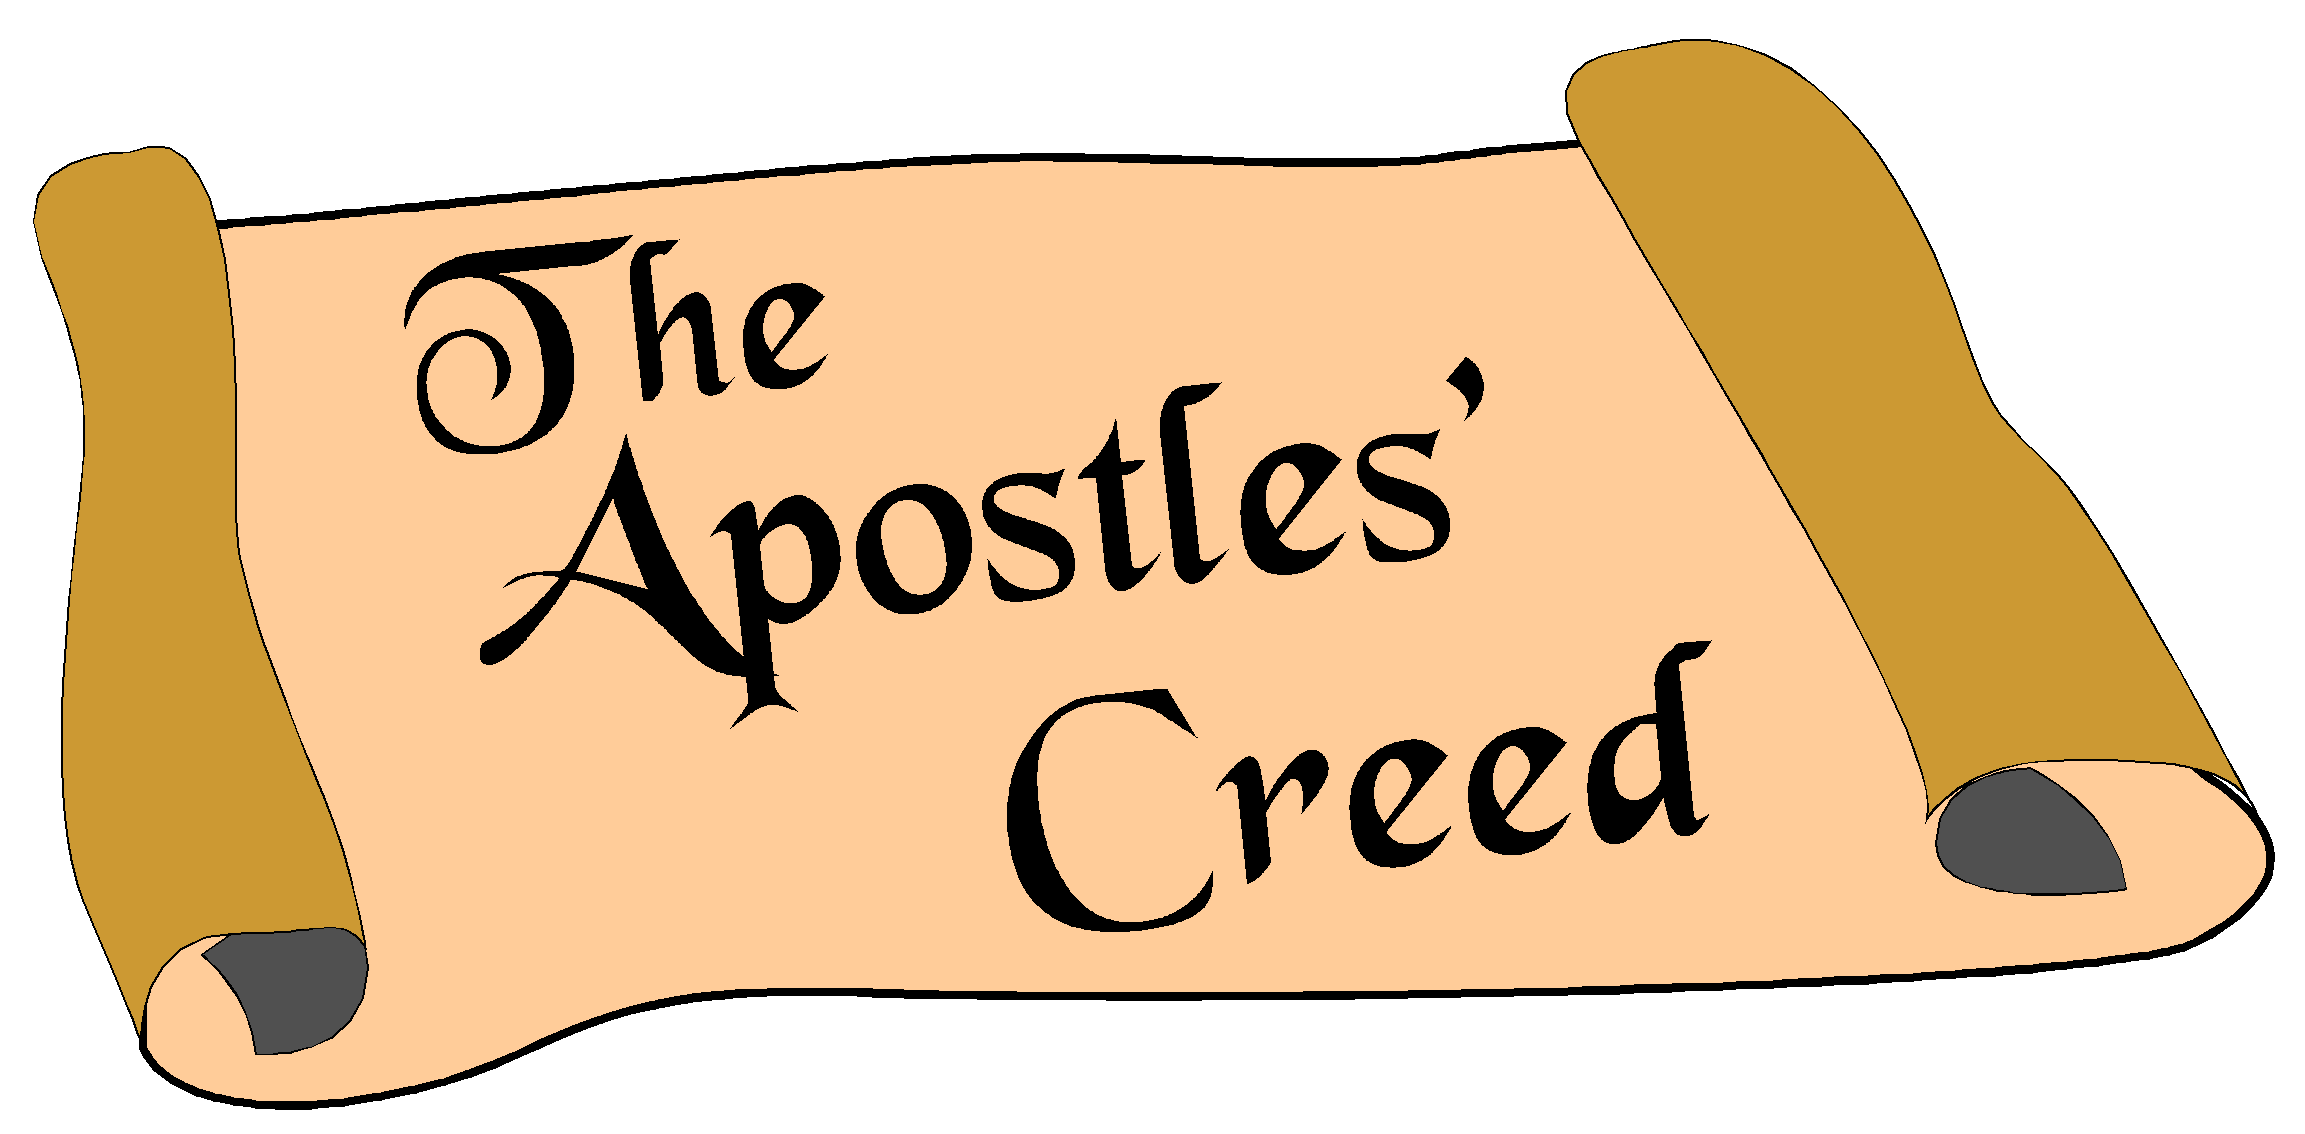 Continue Well in Your Home School The Apostles' Creed